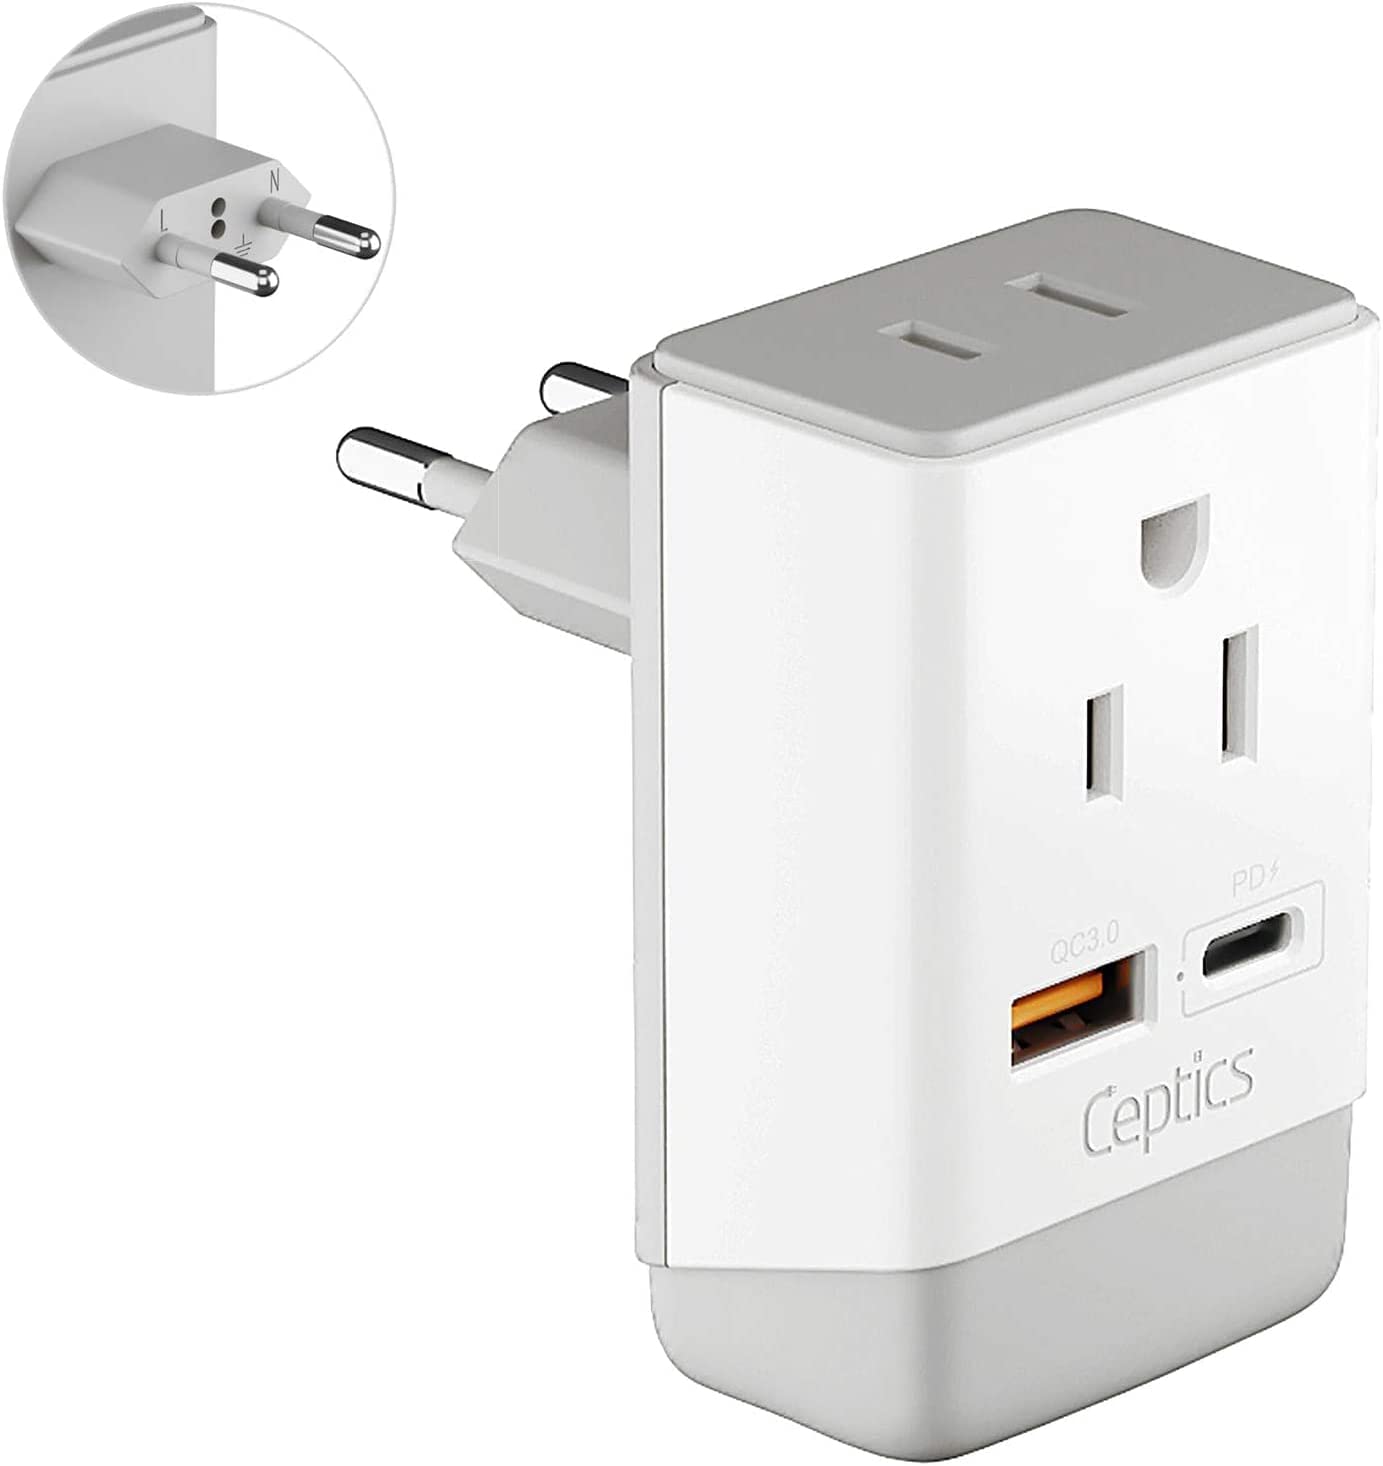 Europe Travel Adapter, Ceptics Ultra Compact Dual USB Power Plug - for European Type C - 3 Inputs - iPhone, Laptop, Galaxy, Cell Phones, Camera Charge, white